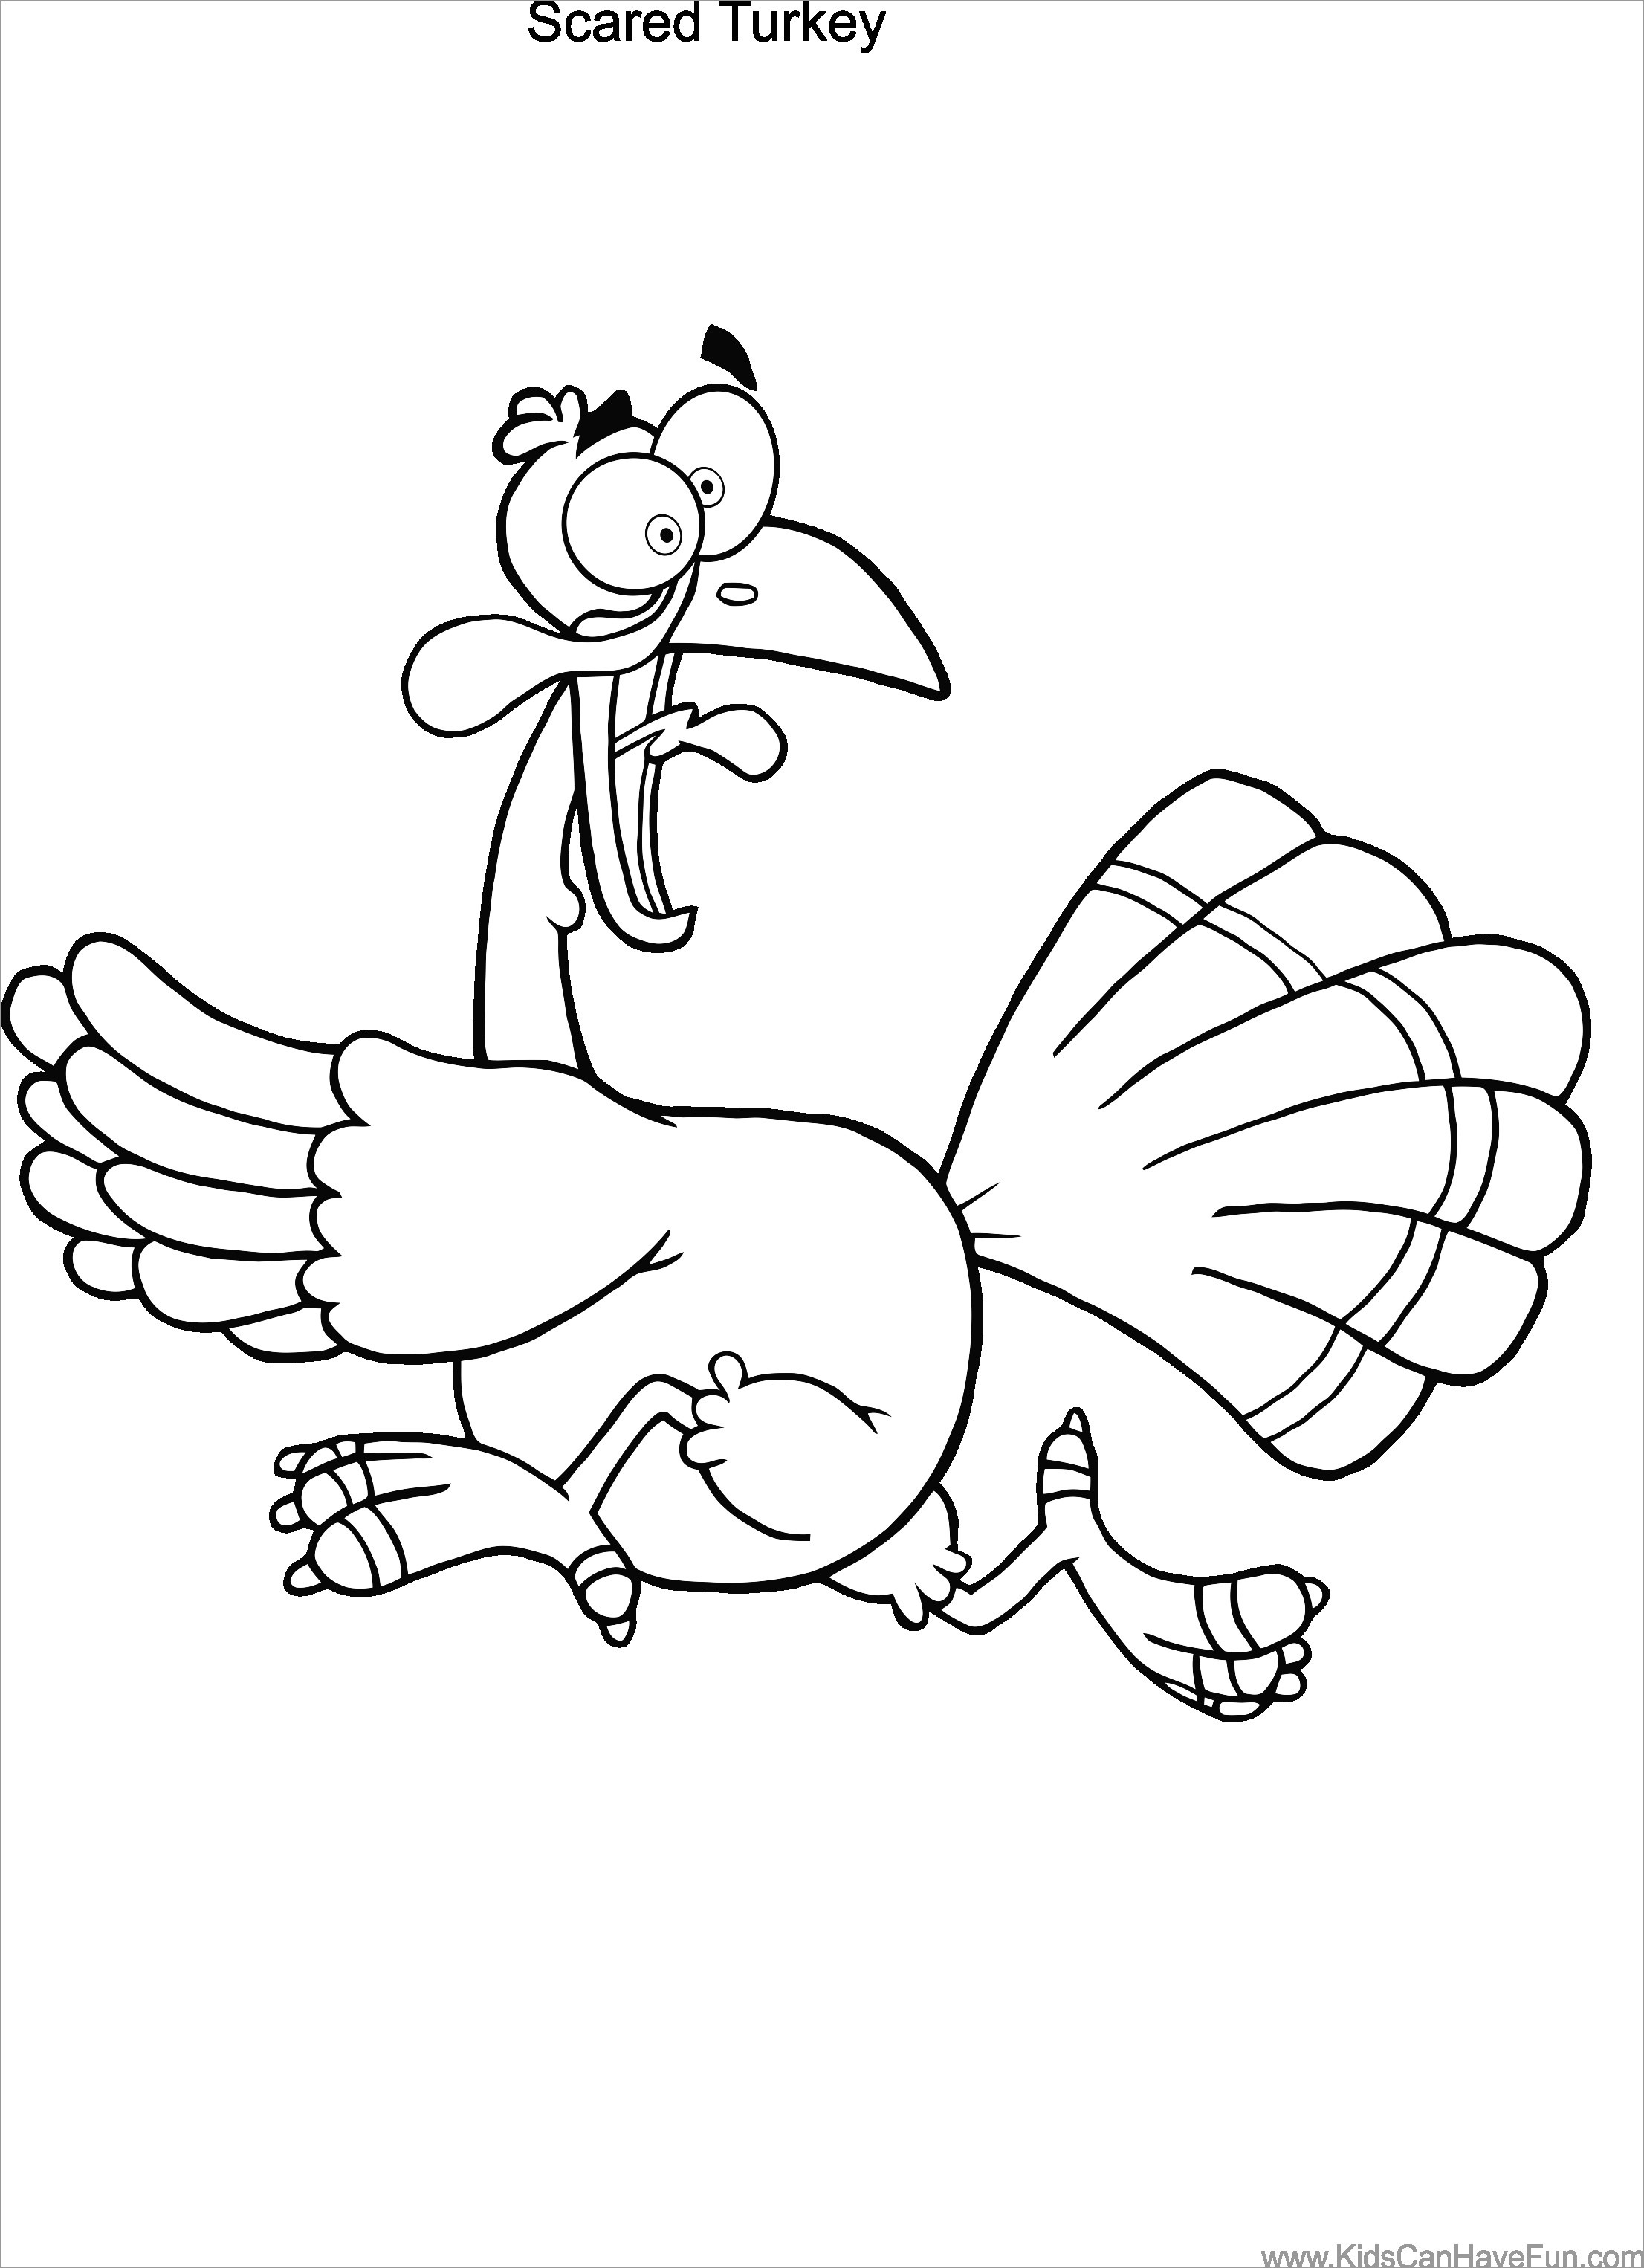 Scarred Turkey Coloring Page